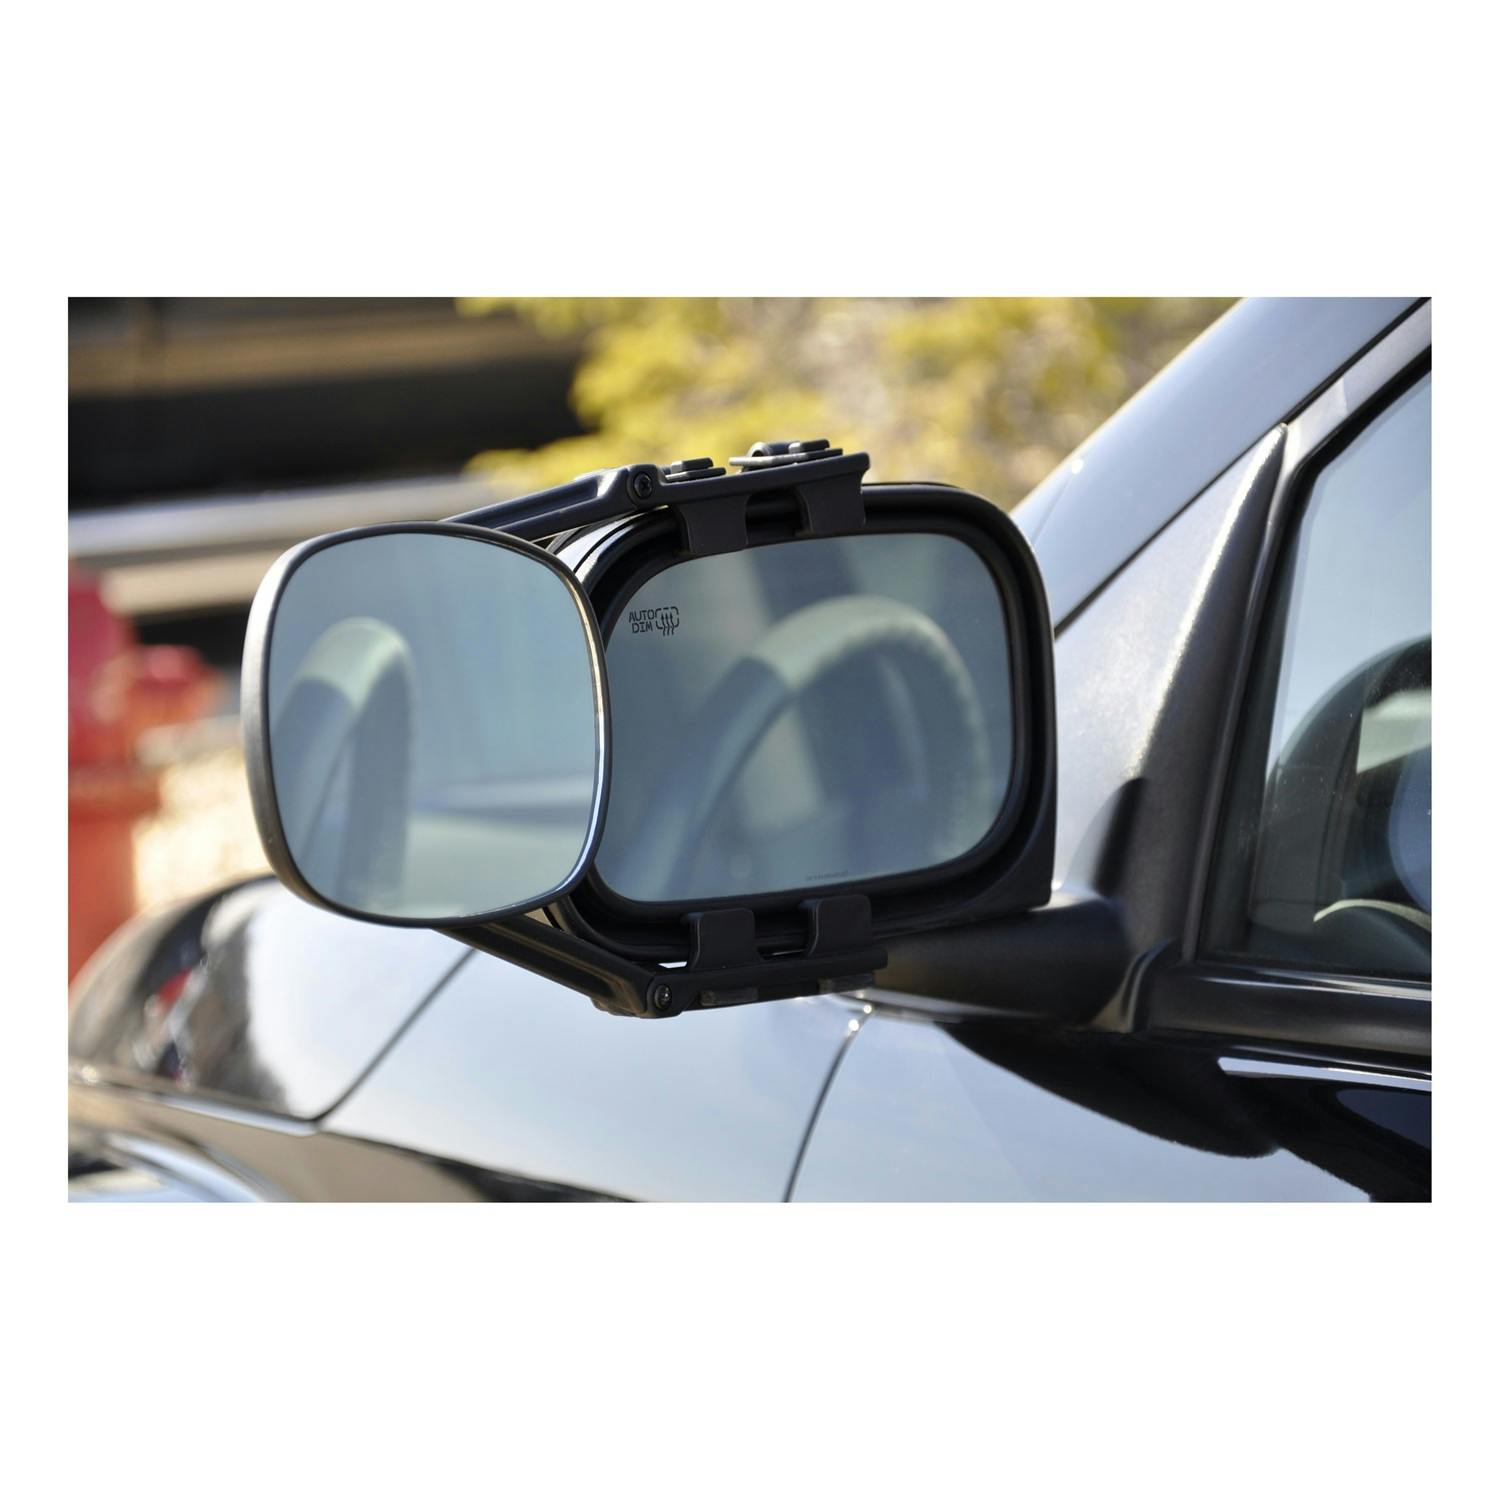 CURT 20002 5-Inch x 7-1/2-Inch Universal Strap-On Adjustable Extendable Towing Mirror 